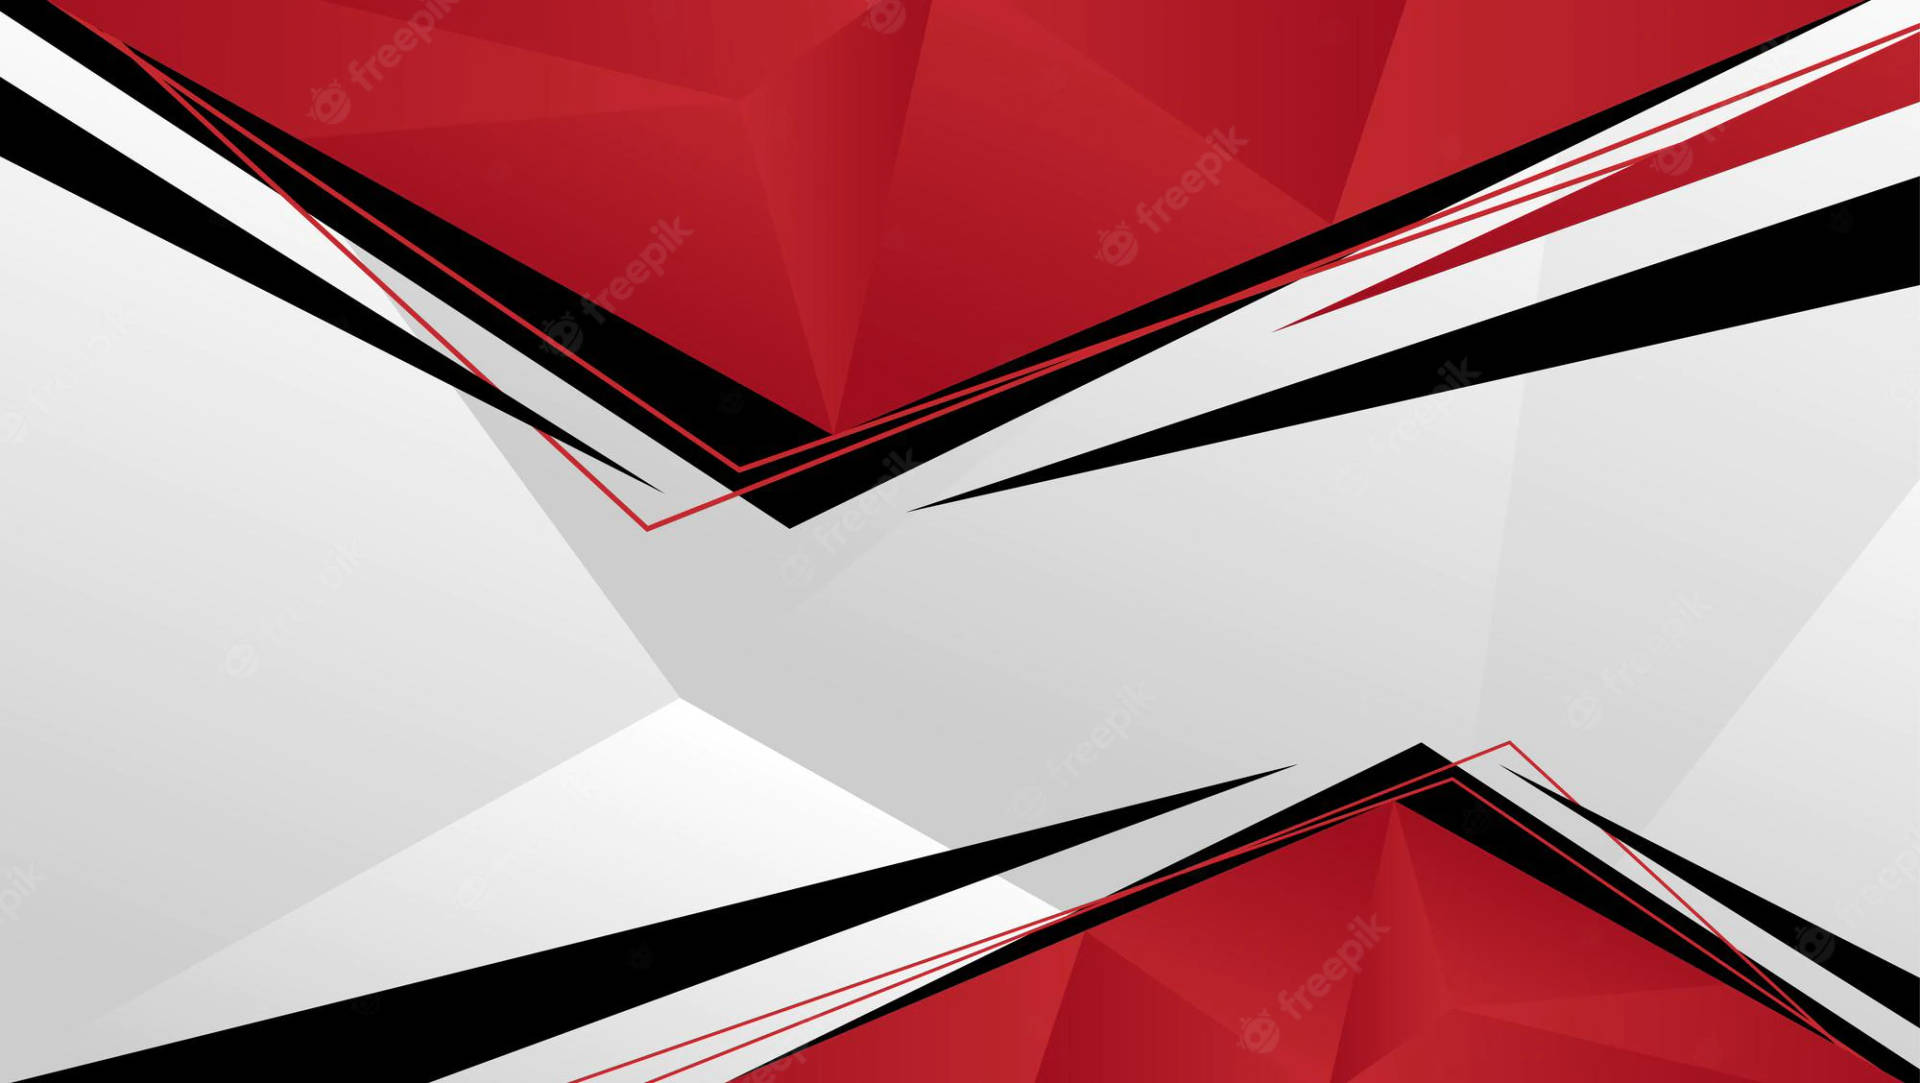 Black, Red And White Sharp Abstract Background